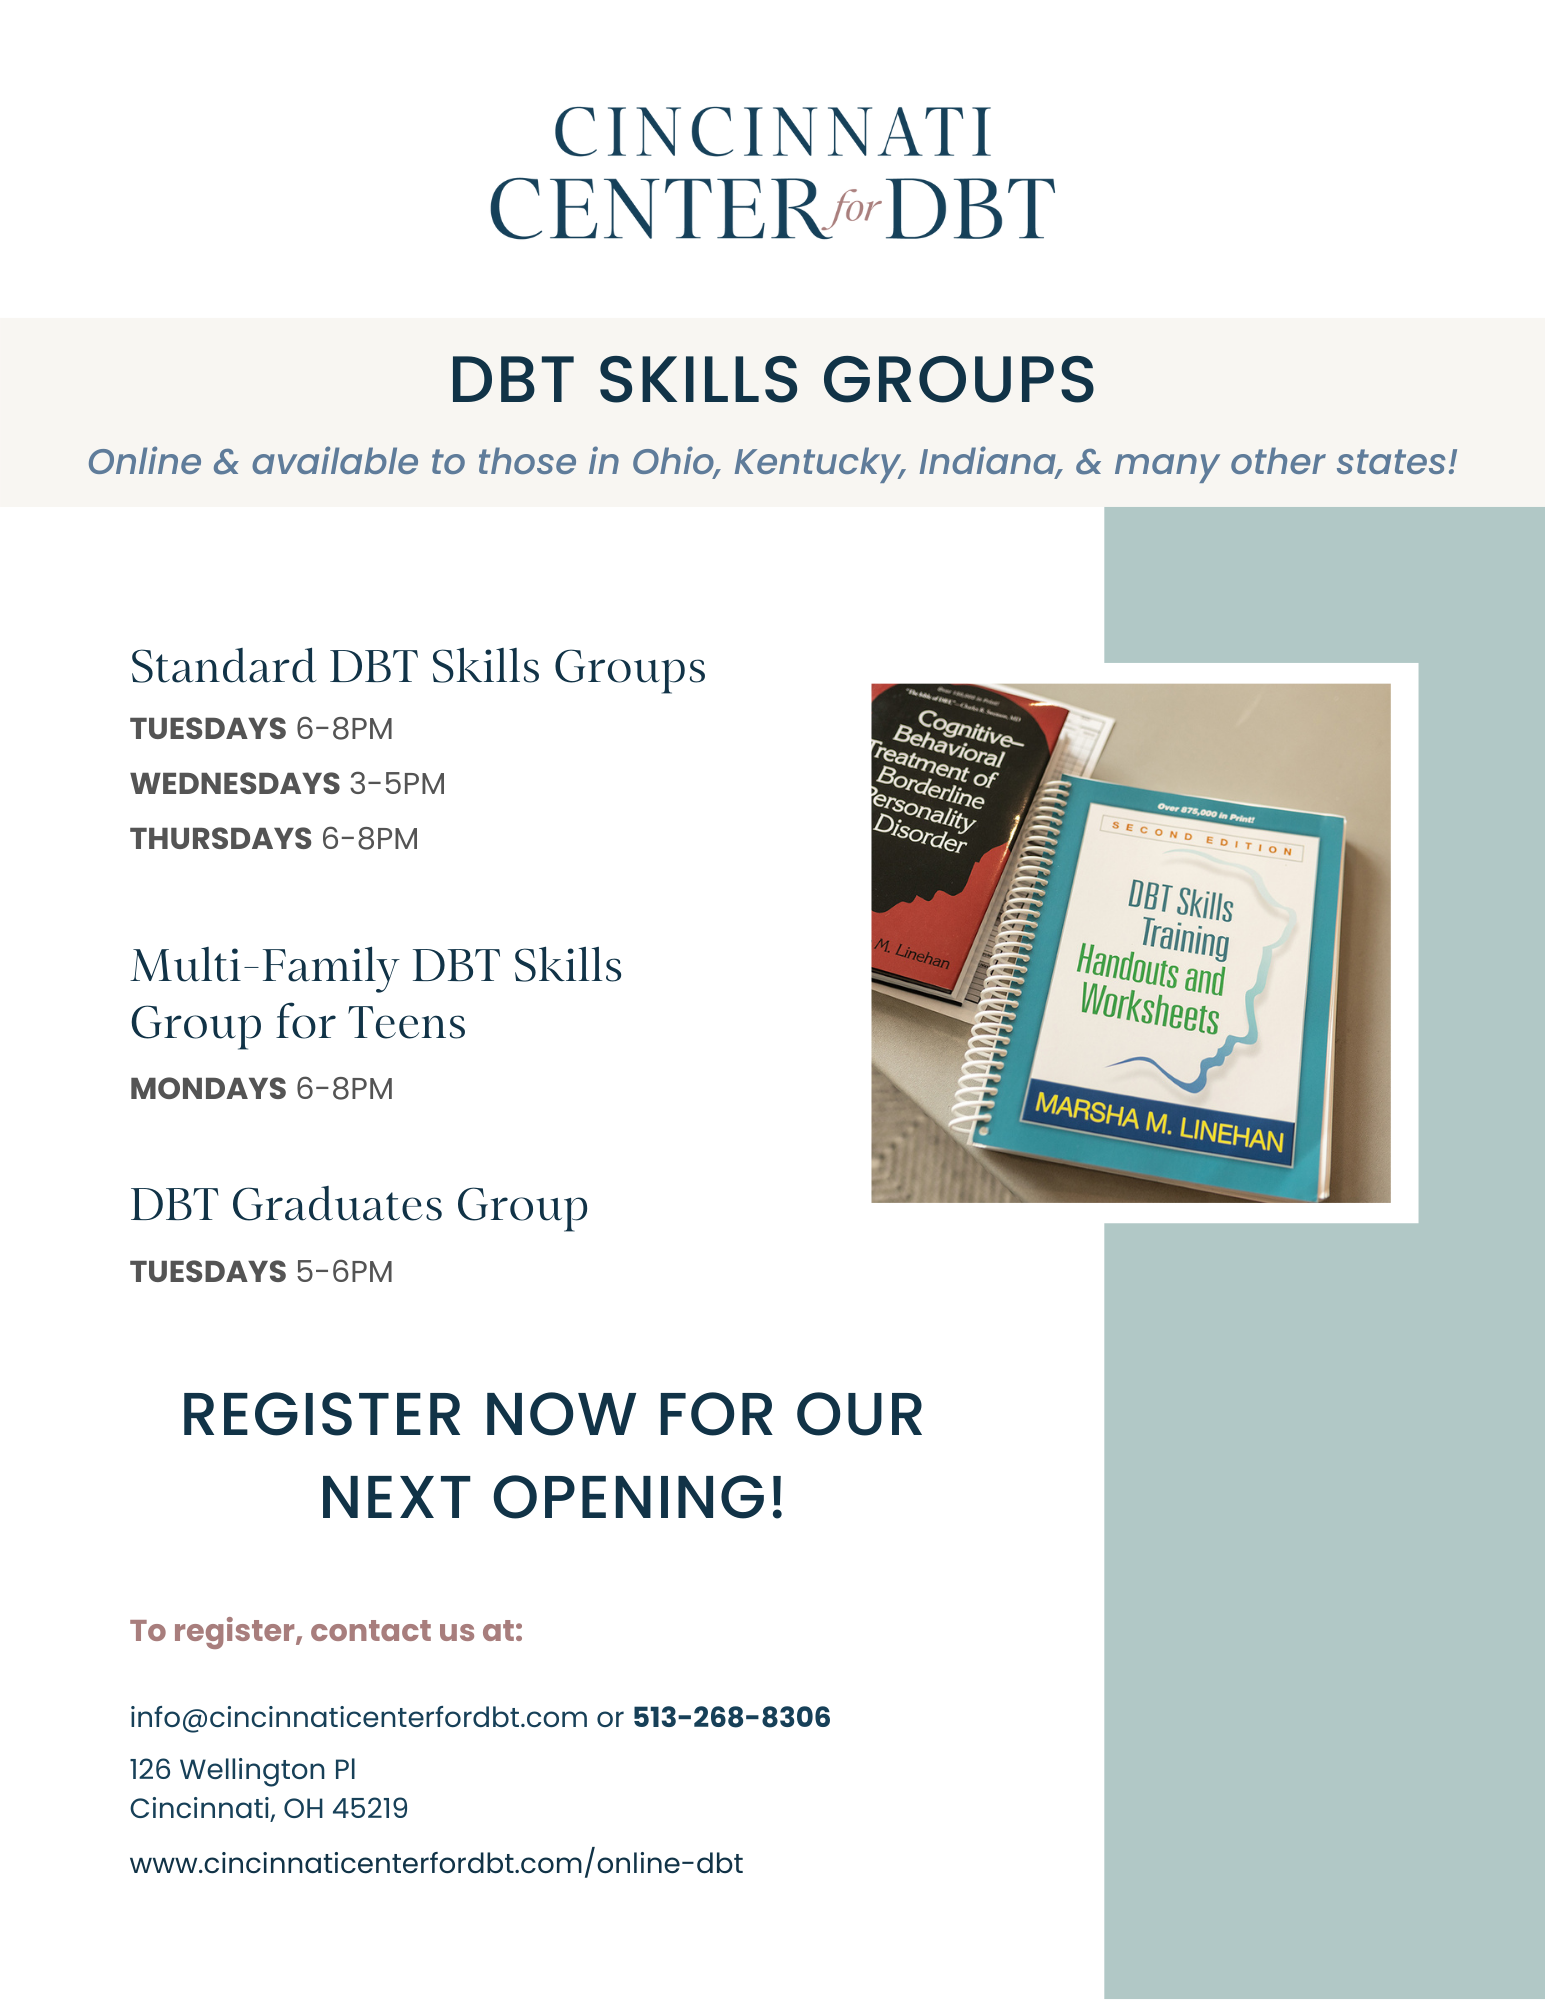 Flyer about Cincinnati Center for DBT's DBT Skills training groups for adults, adolescents, and families